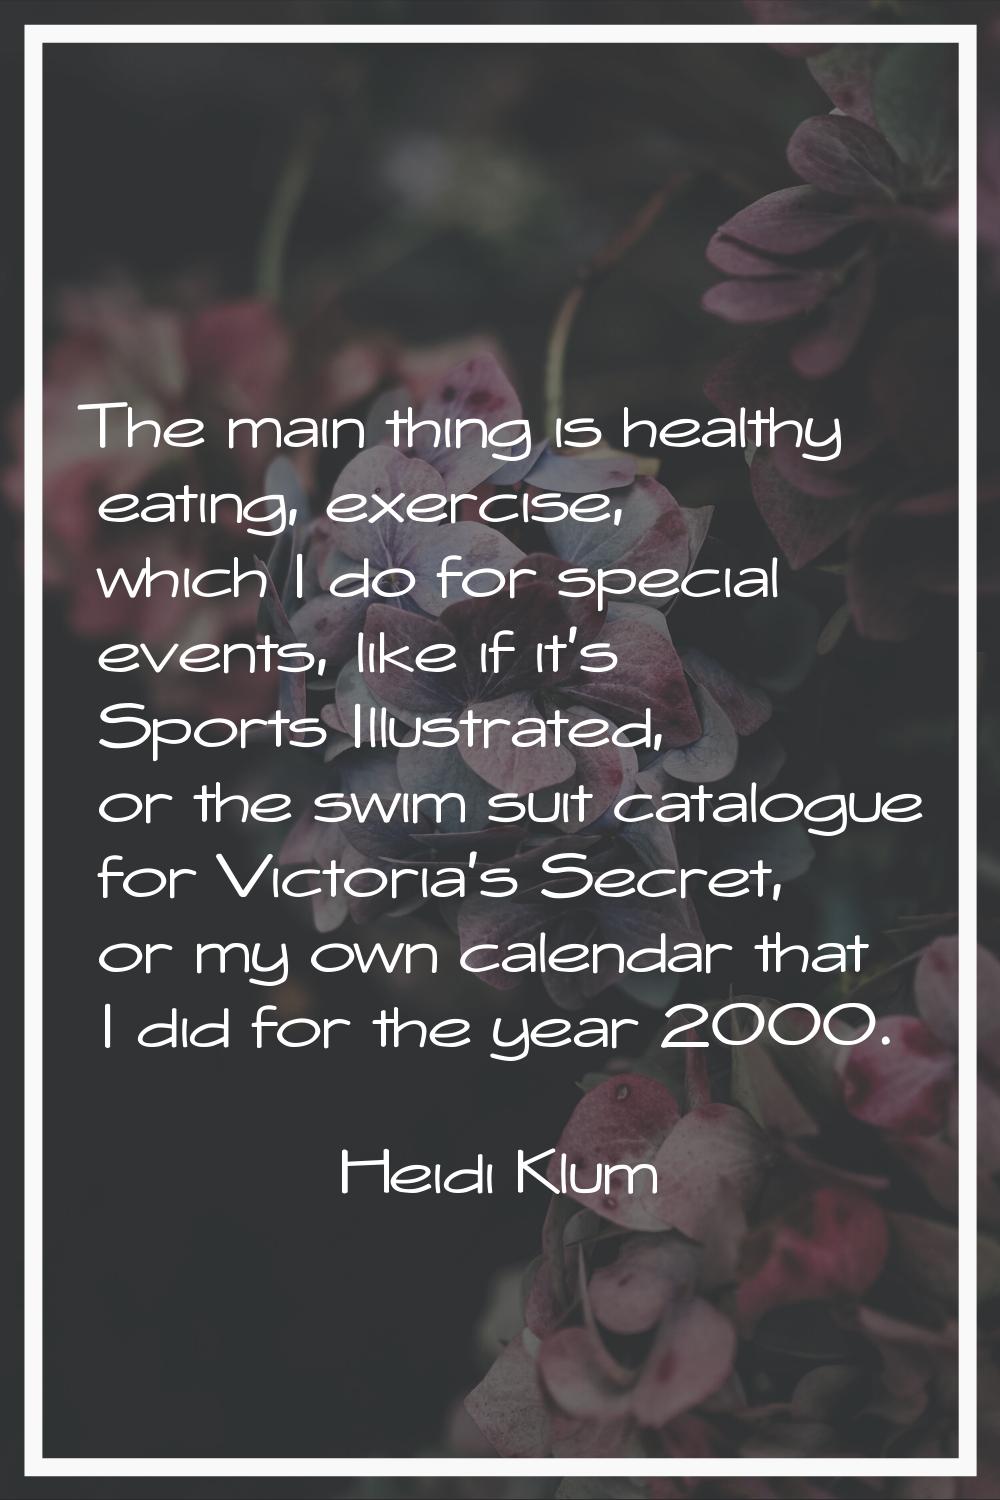 The main thing is healthy eating, exercise, which I do for special events, like if it's Sports Illu